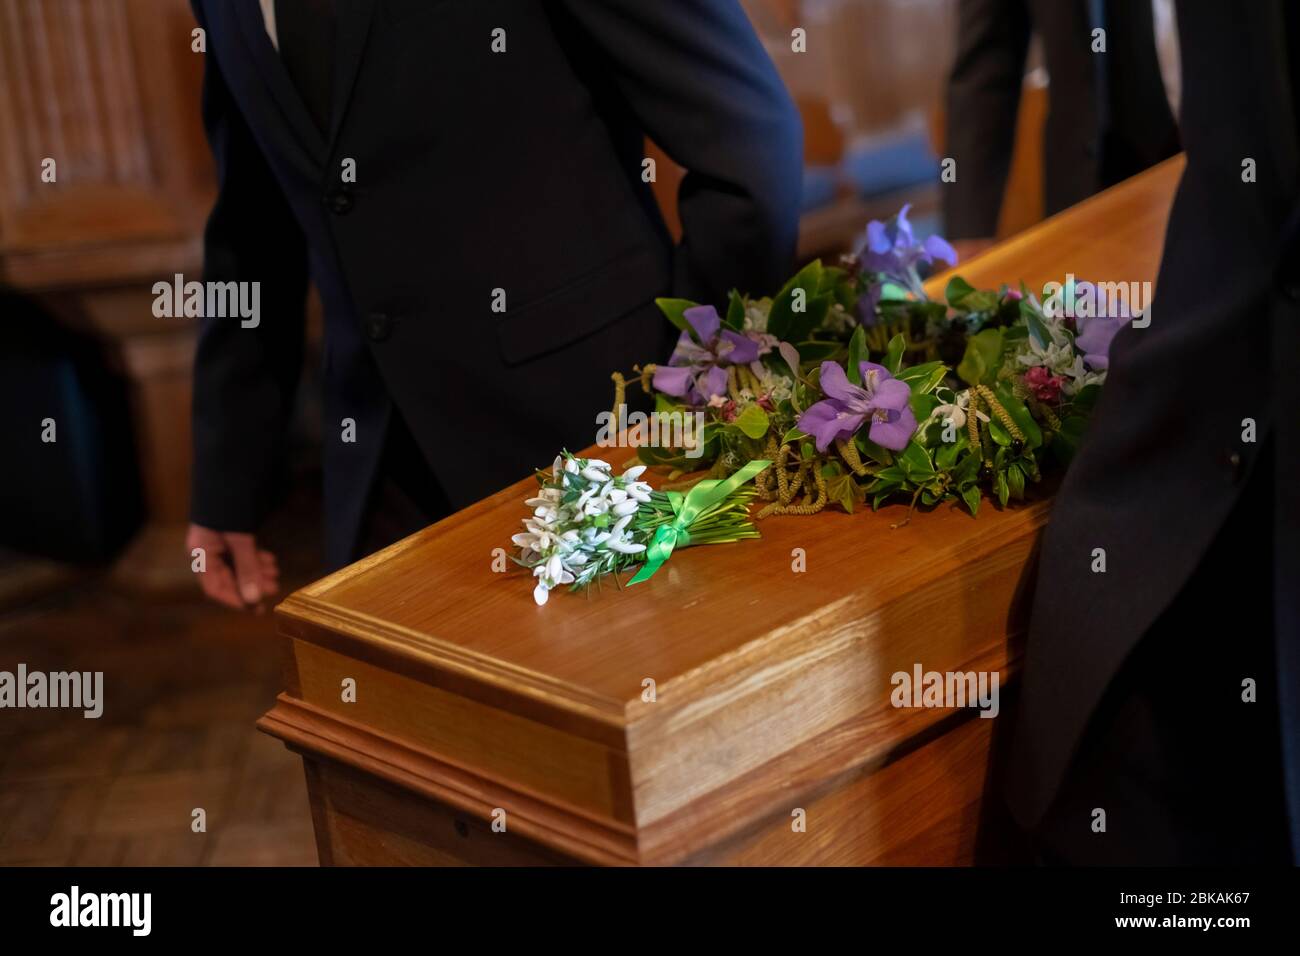 Funeral at a rural church in Southern UK February 2020 Stock Photo